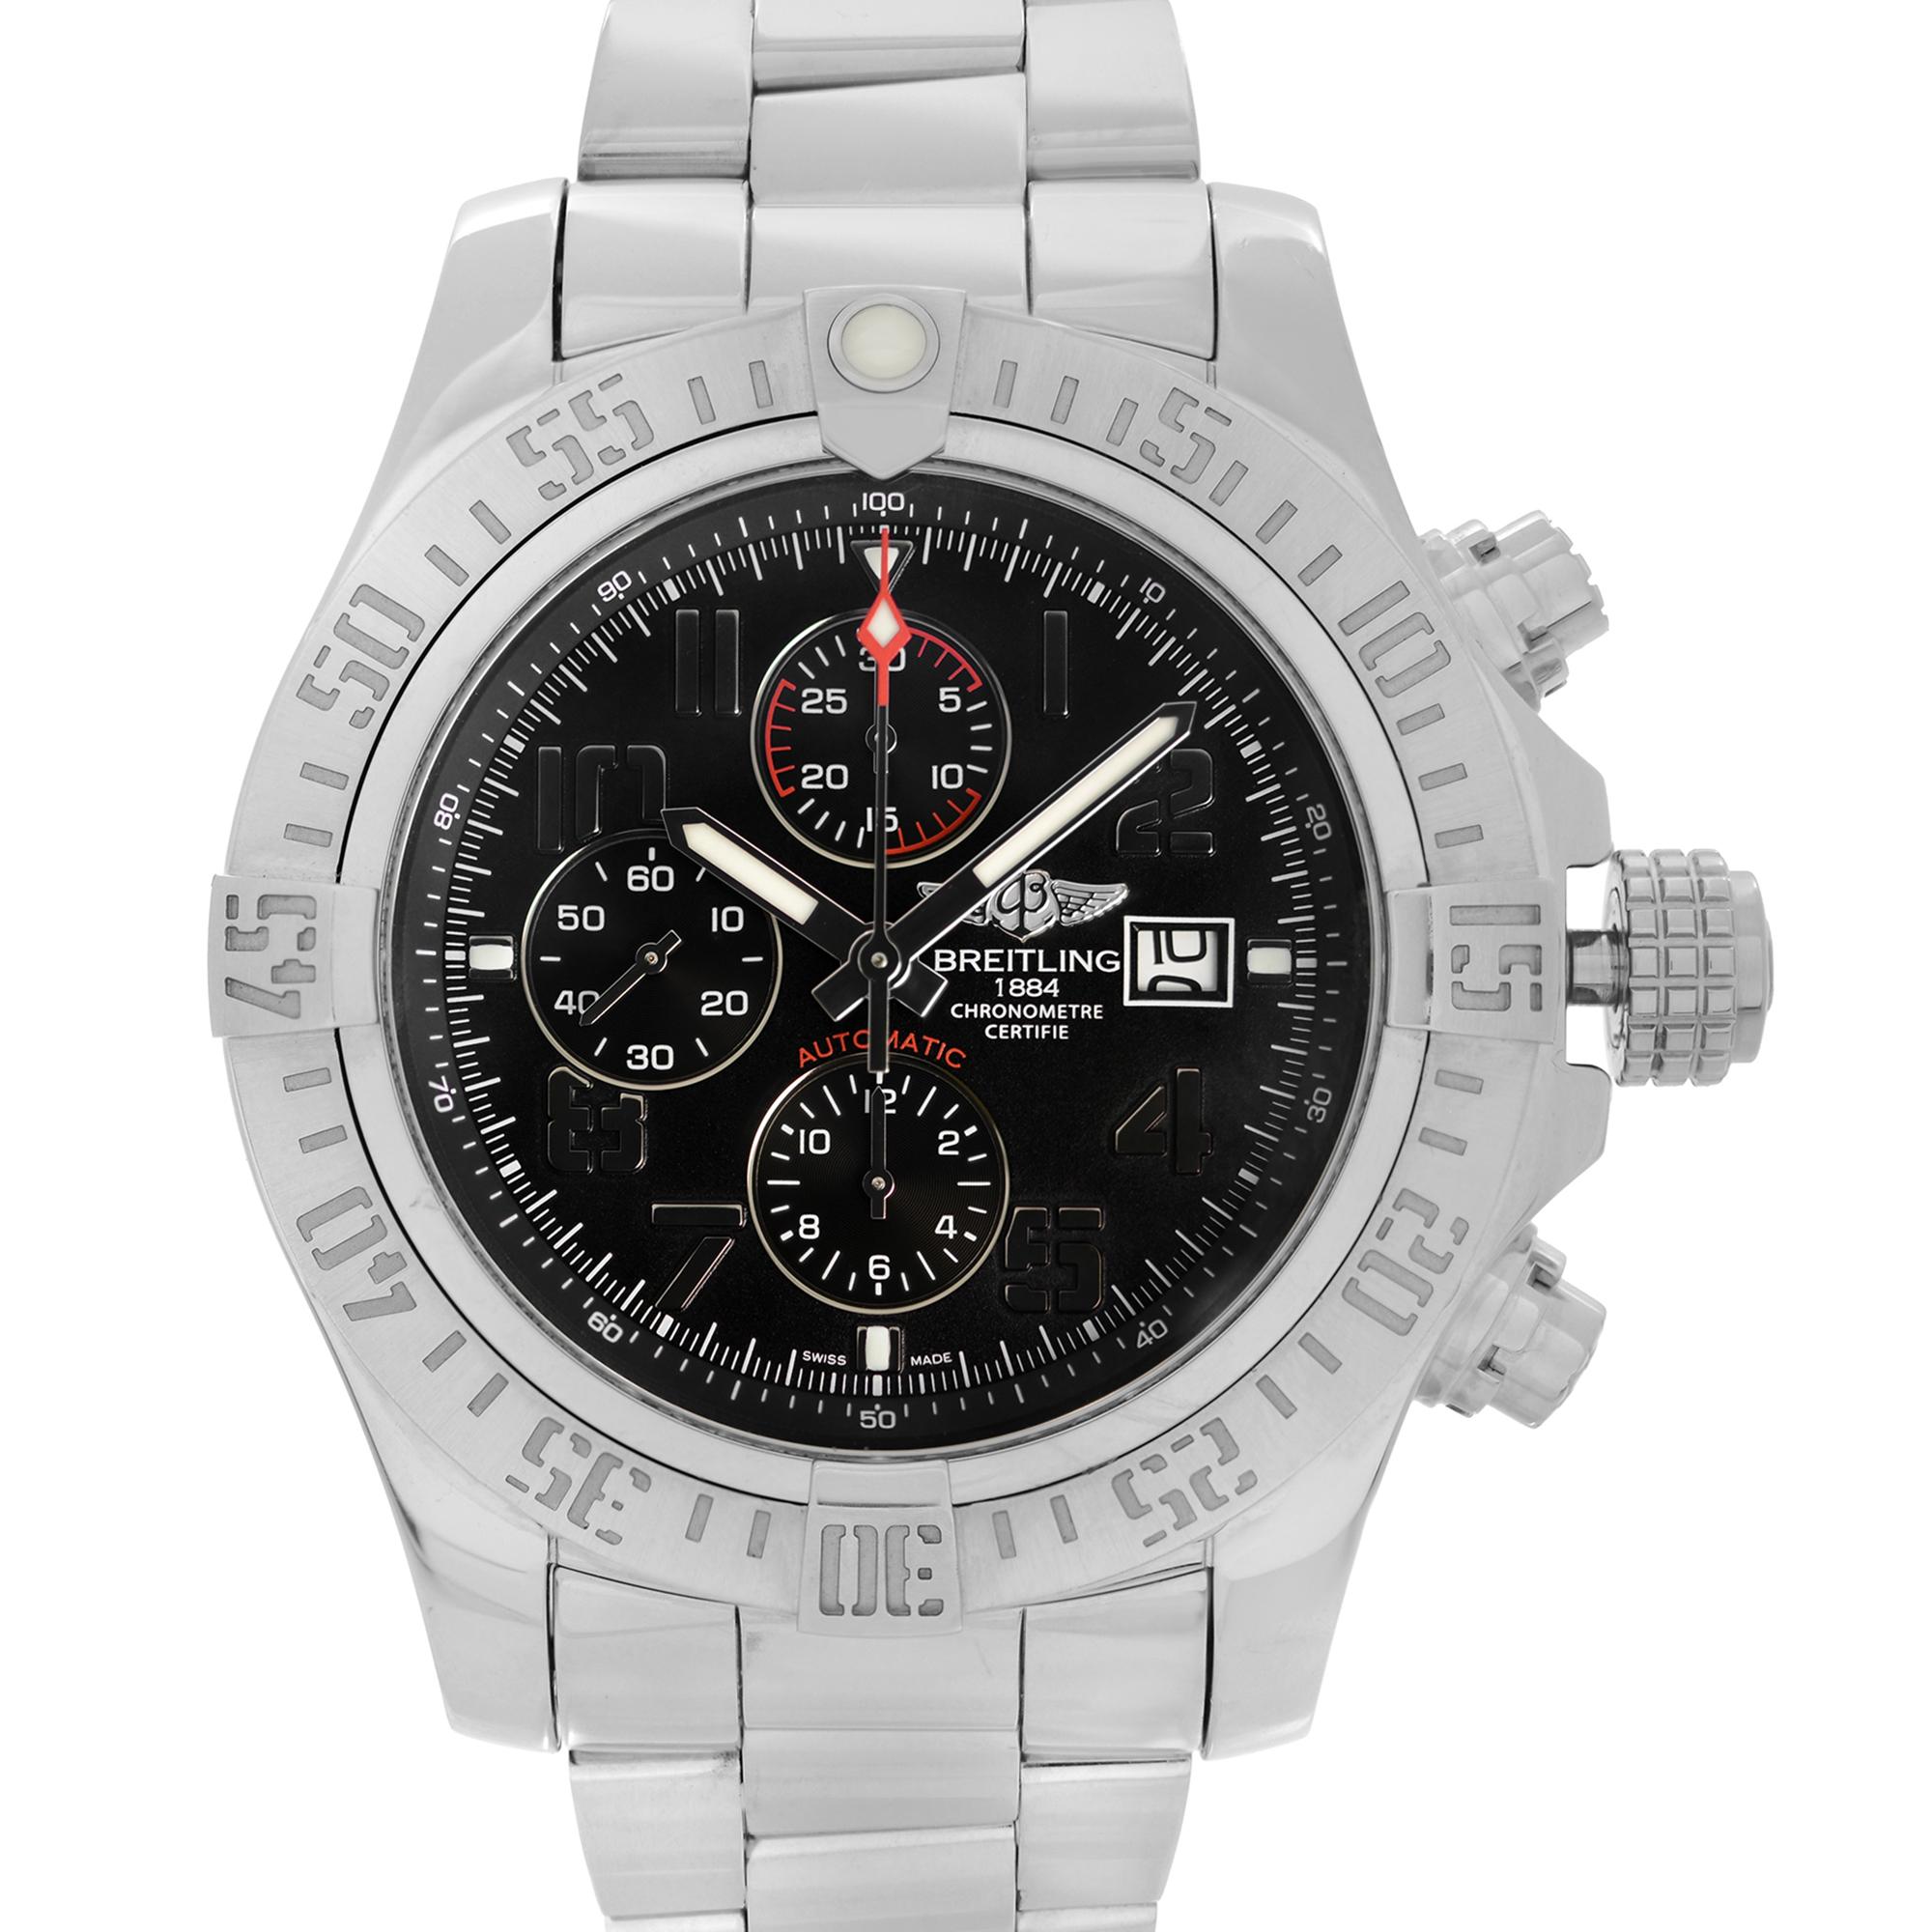 Pre-Owned Breitling Super Avenger II 48mm Chronograph Steel Black Dial Men's Automatic Watch A13371111B2A1. The Timepiece is powered by an Automatic movement. Features: Polished Stainless Steel Case and Steel Bracelet. Unidirectional Rotating Steel